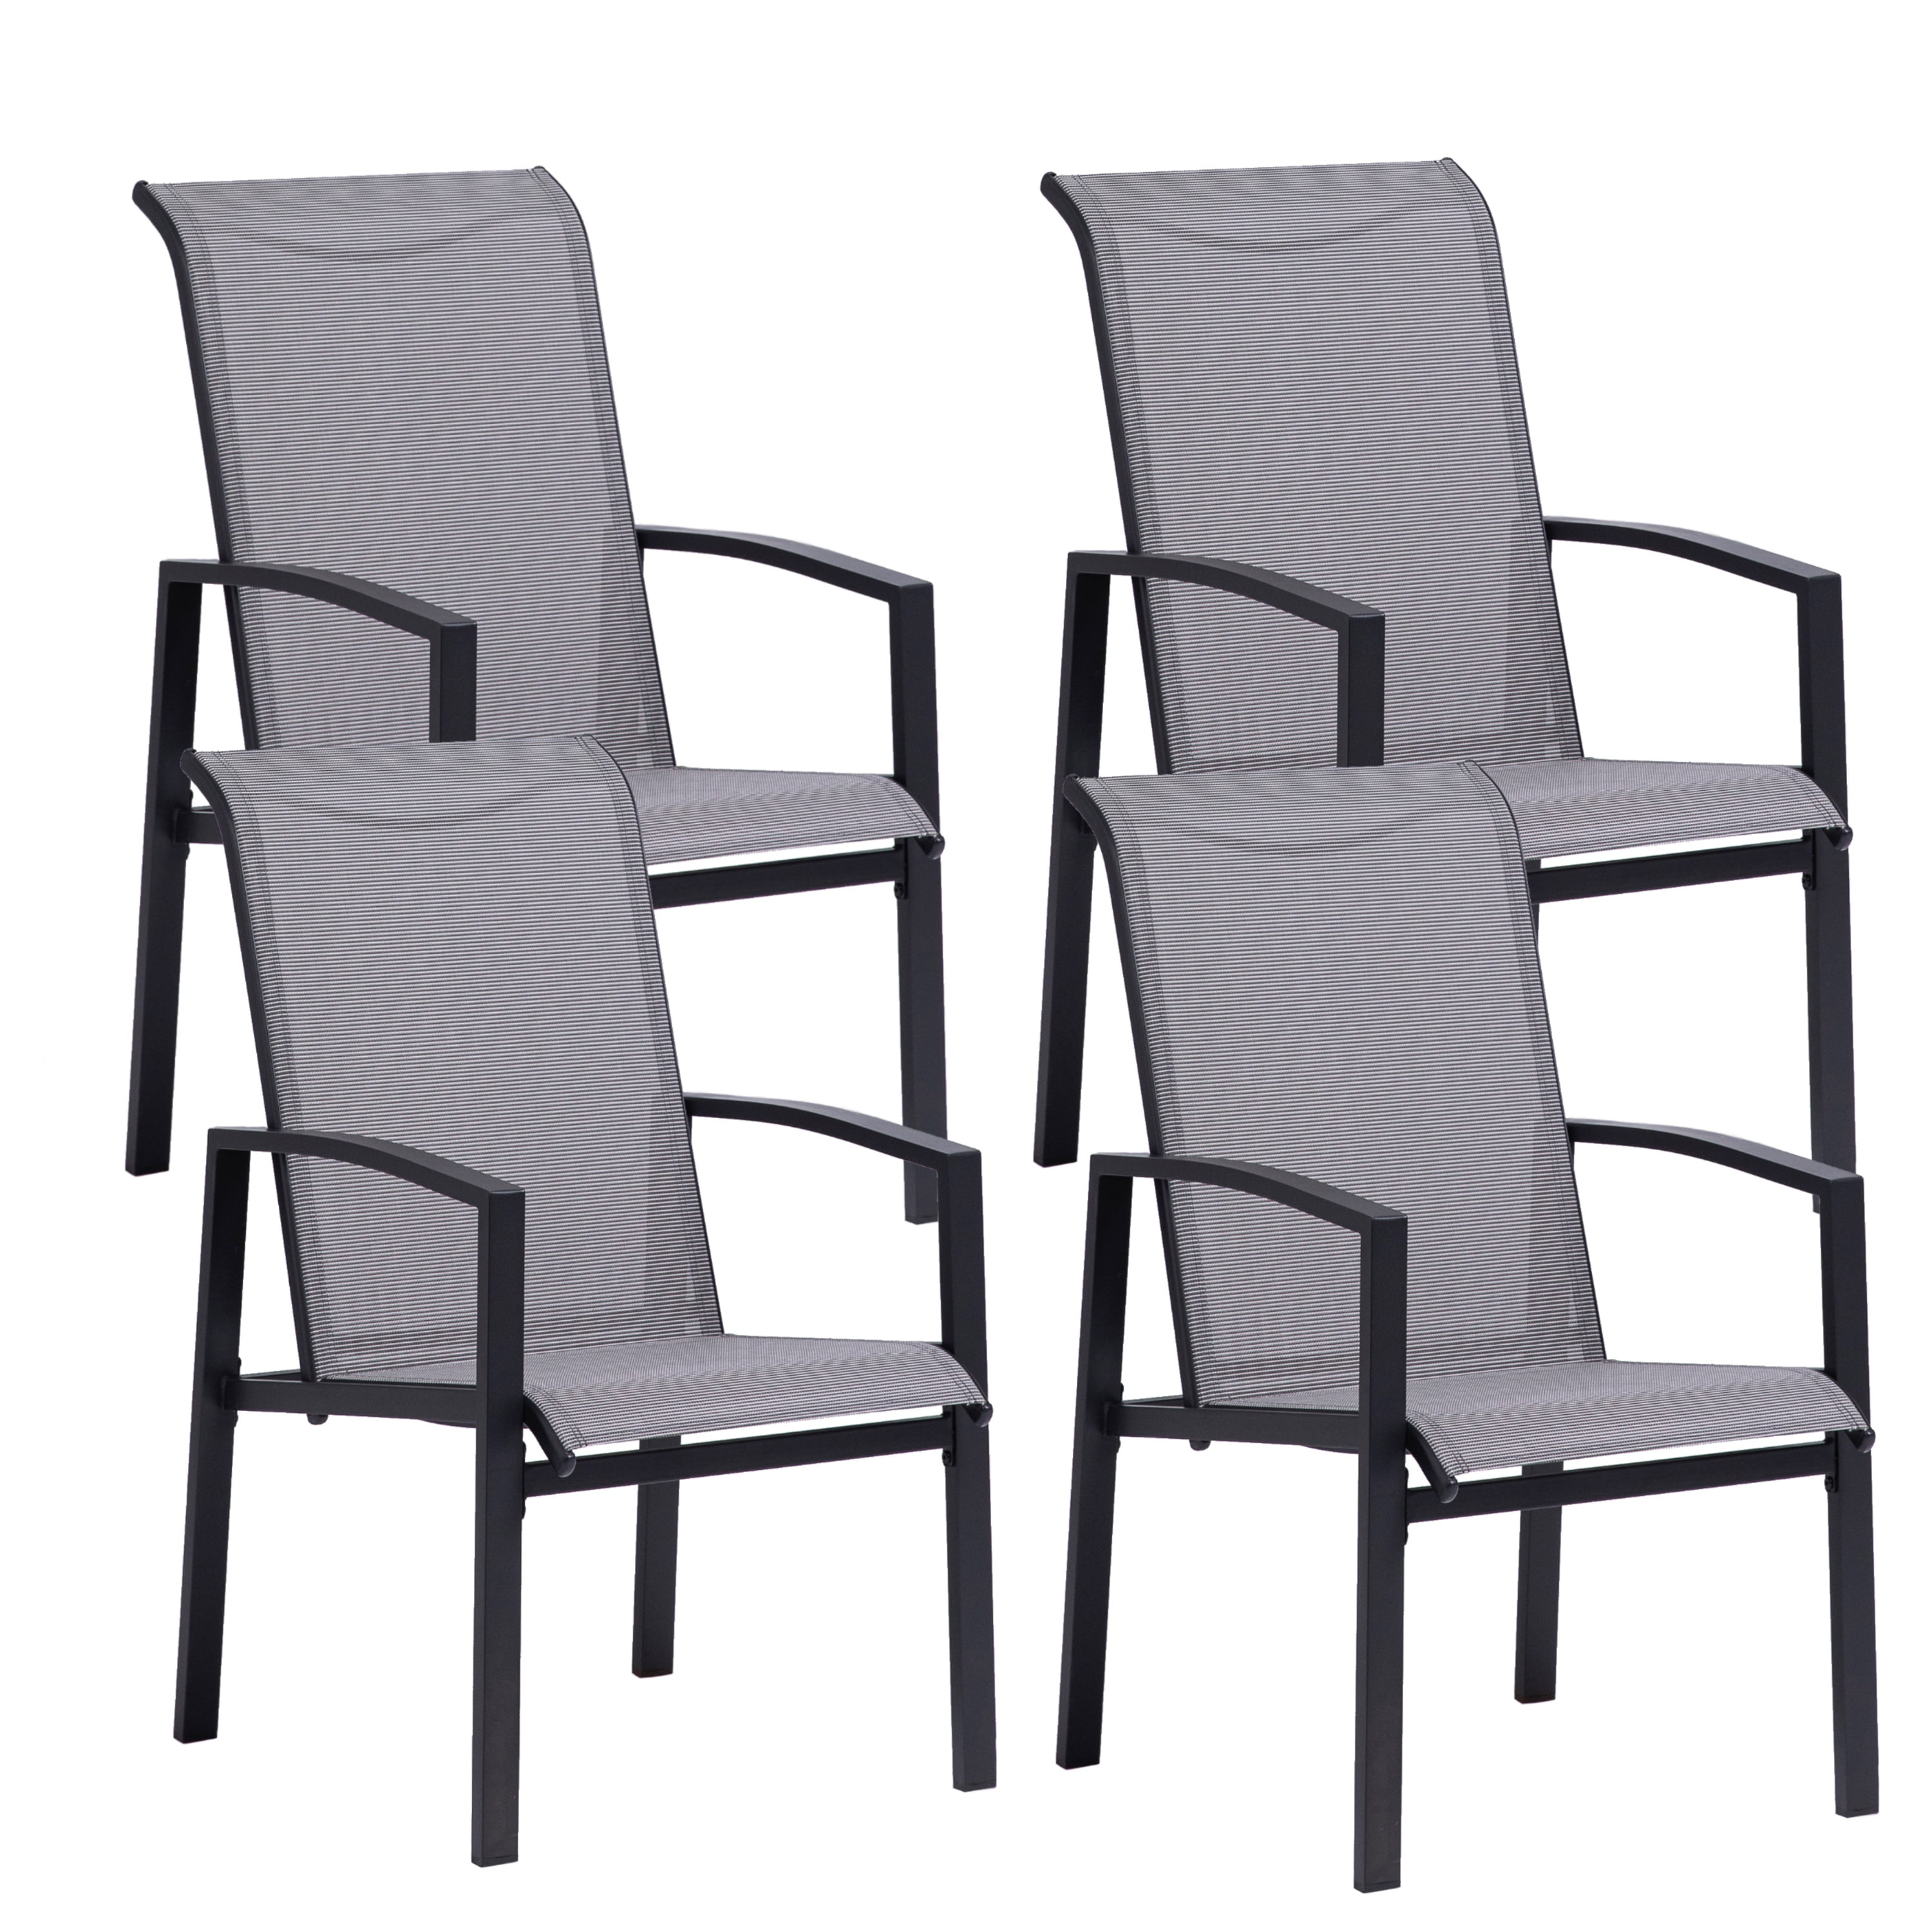 2 x CHILDS KIDS Happy stackable stacking textilene steel frame garden chair LIME 